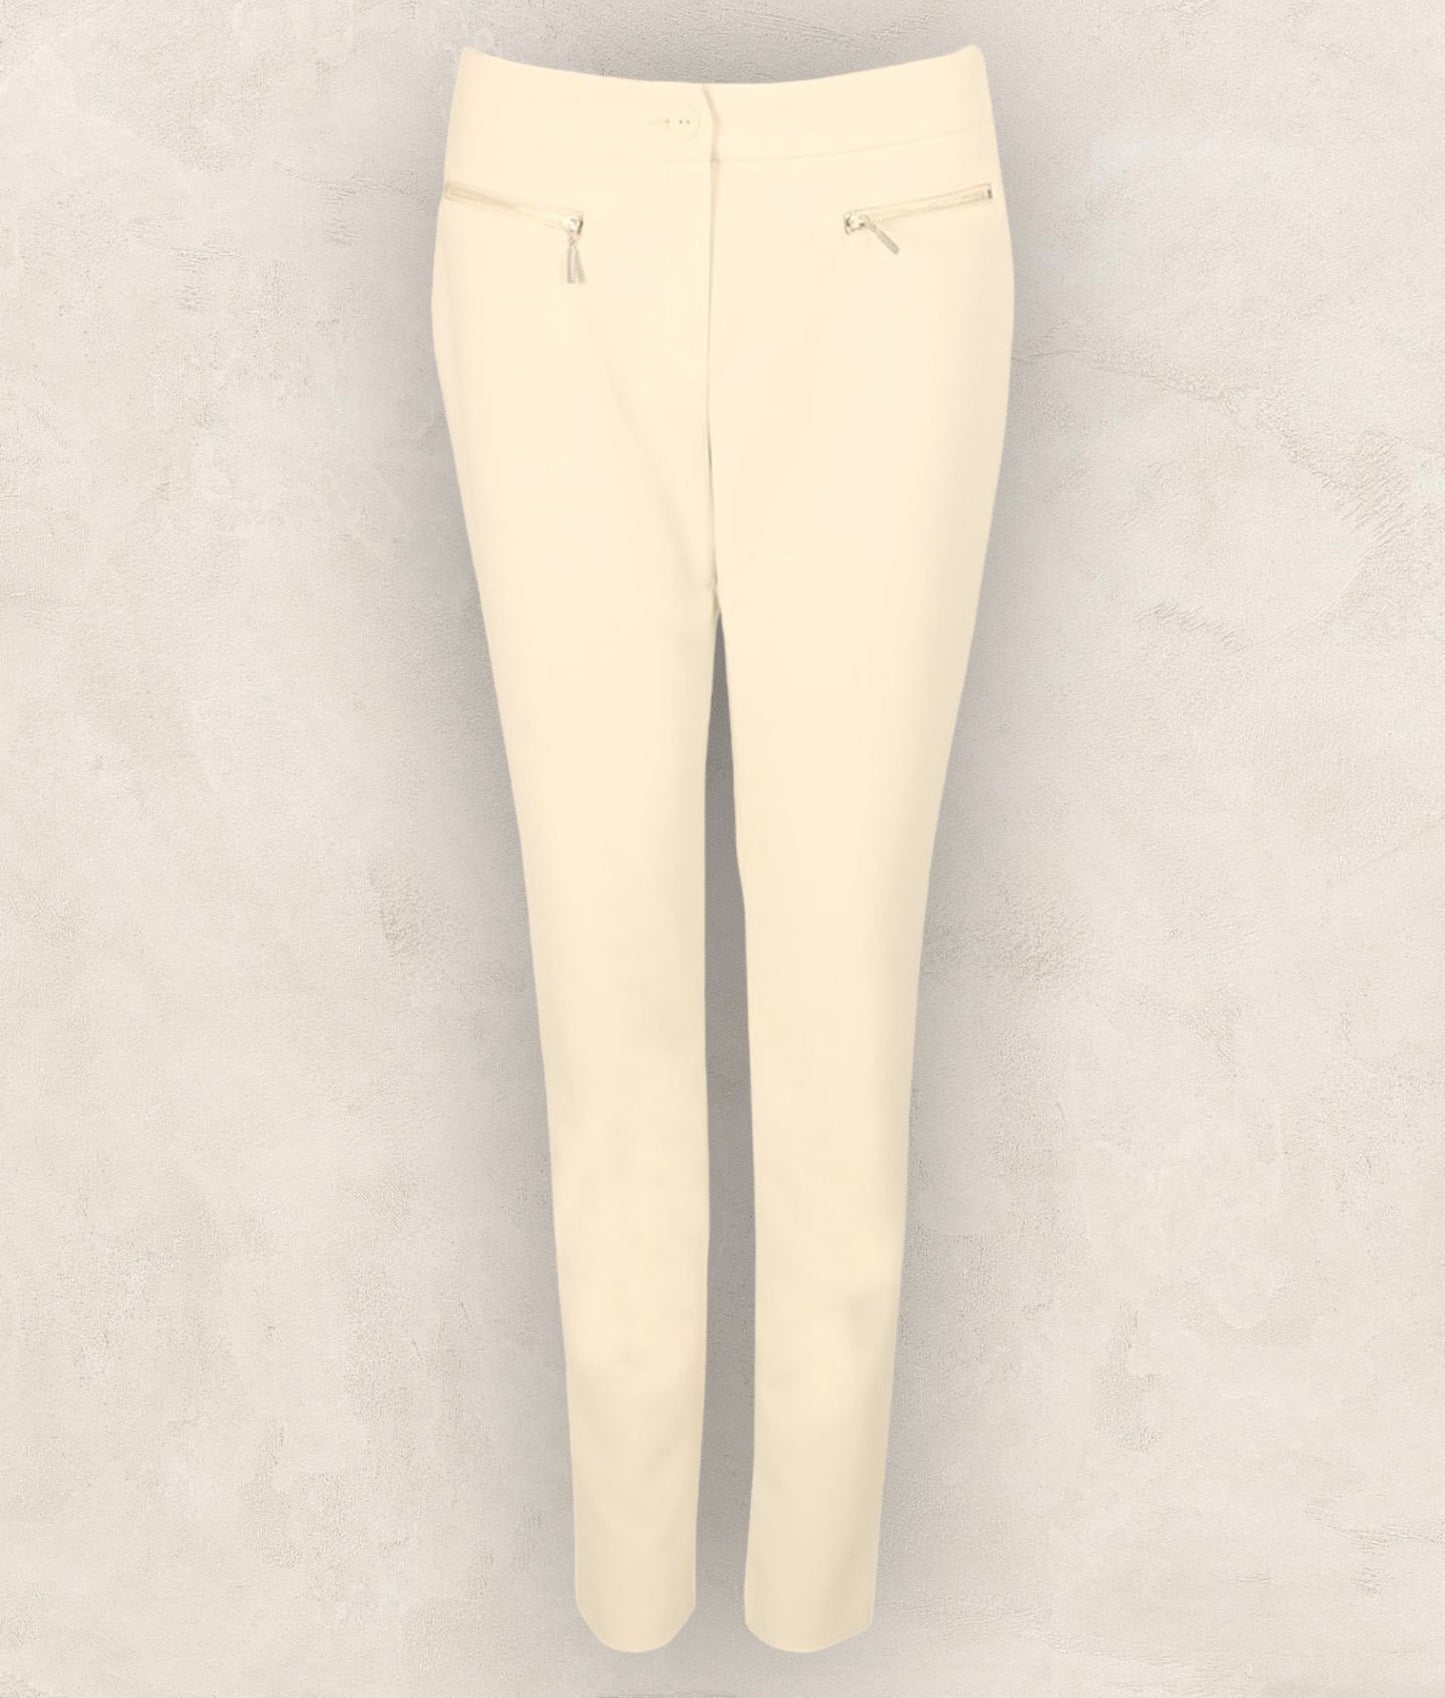 Marie Mero Cream Ladies Zip Pockets Tapered Stretch Trousers UK 16 US 12 EU 44 Timeless Fashions